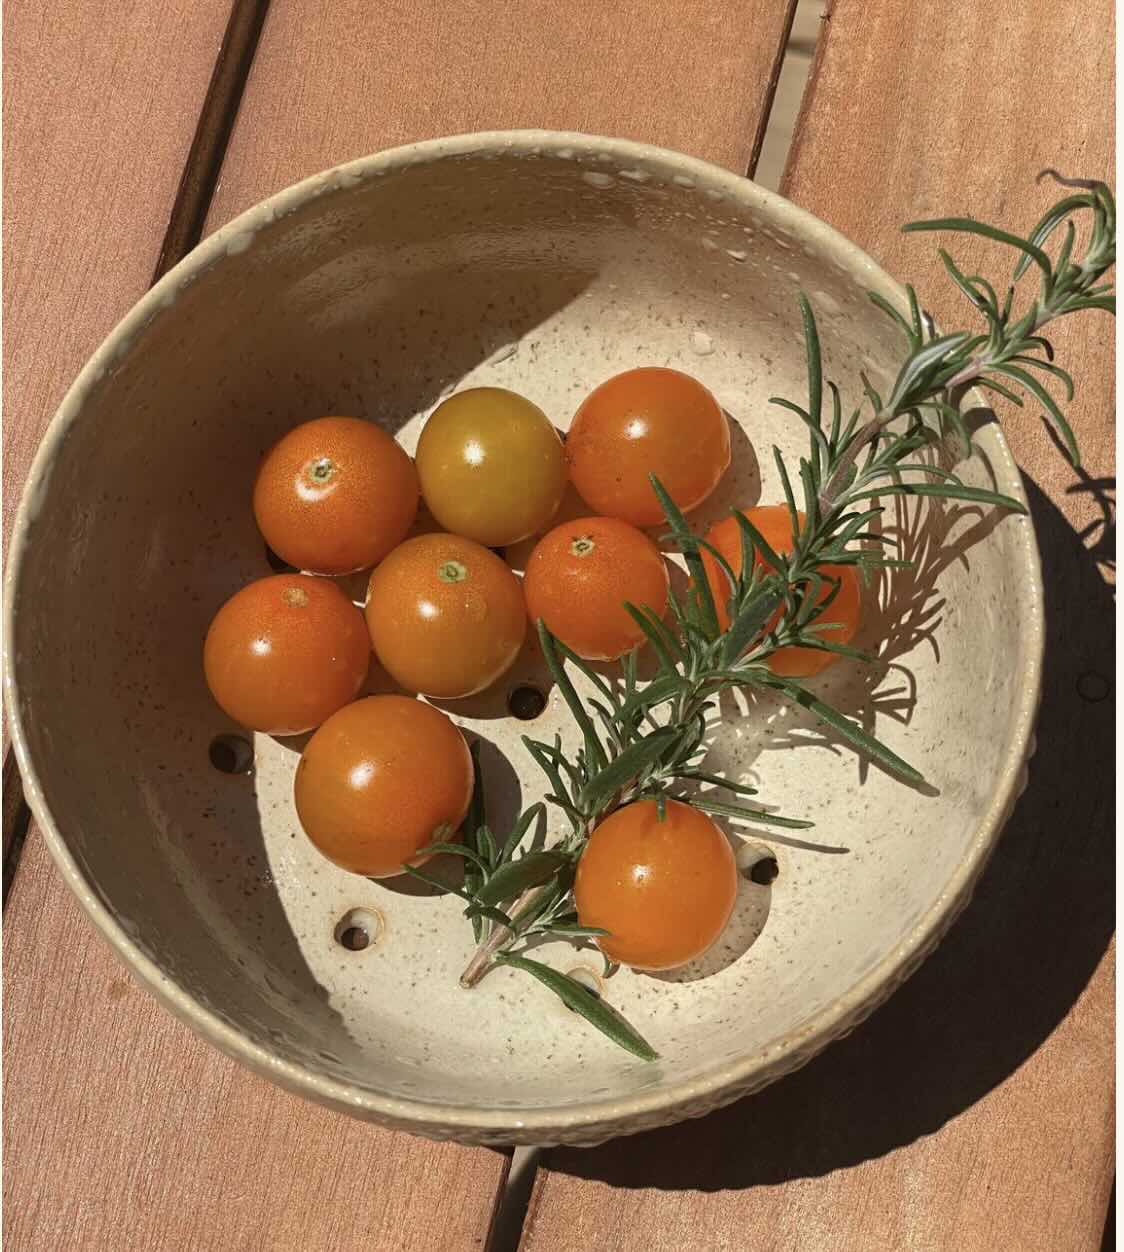 Berry bowl made by Hey Moon Ceramics with grape tomatoes and rosemary.